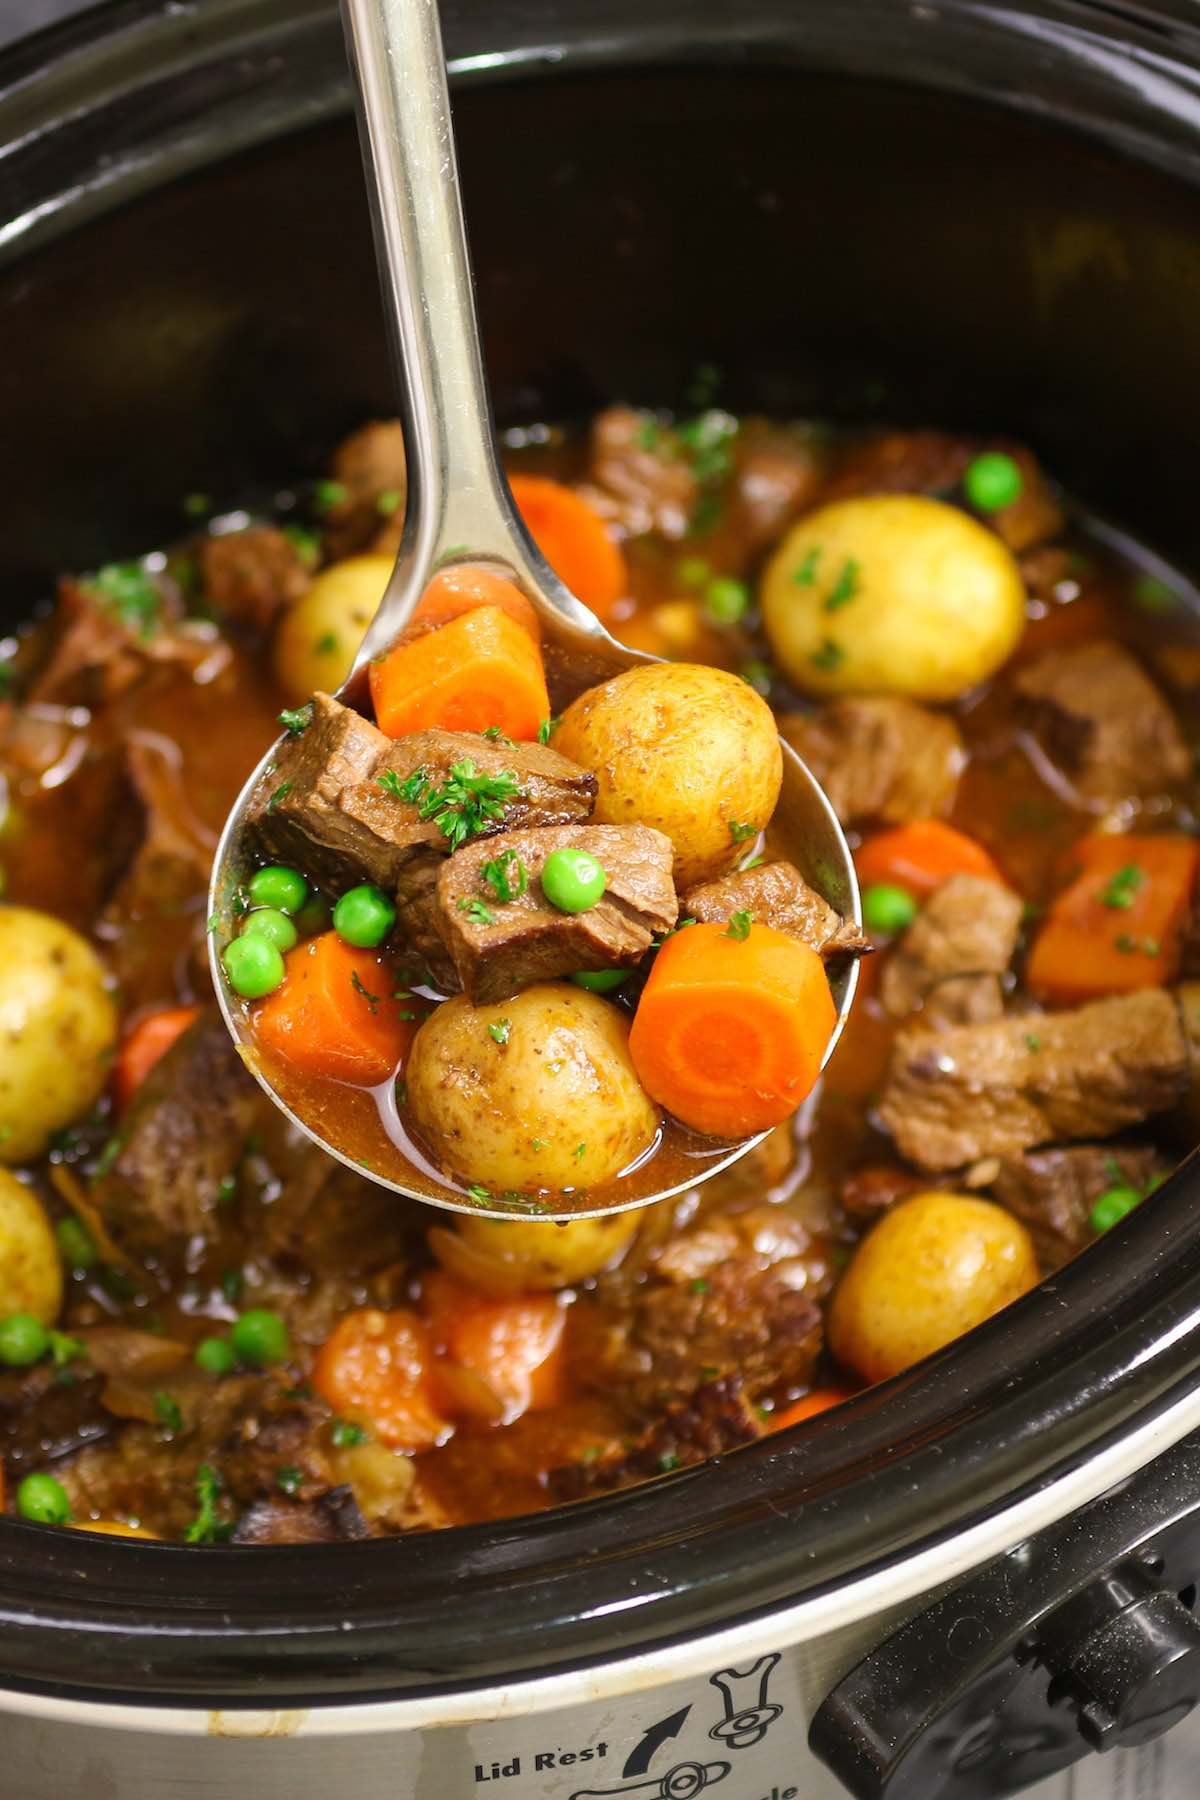 Classic beef stew after 8 hours of cooking in the crock pot